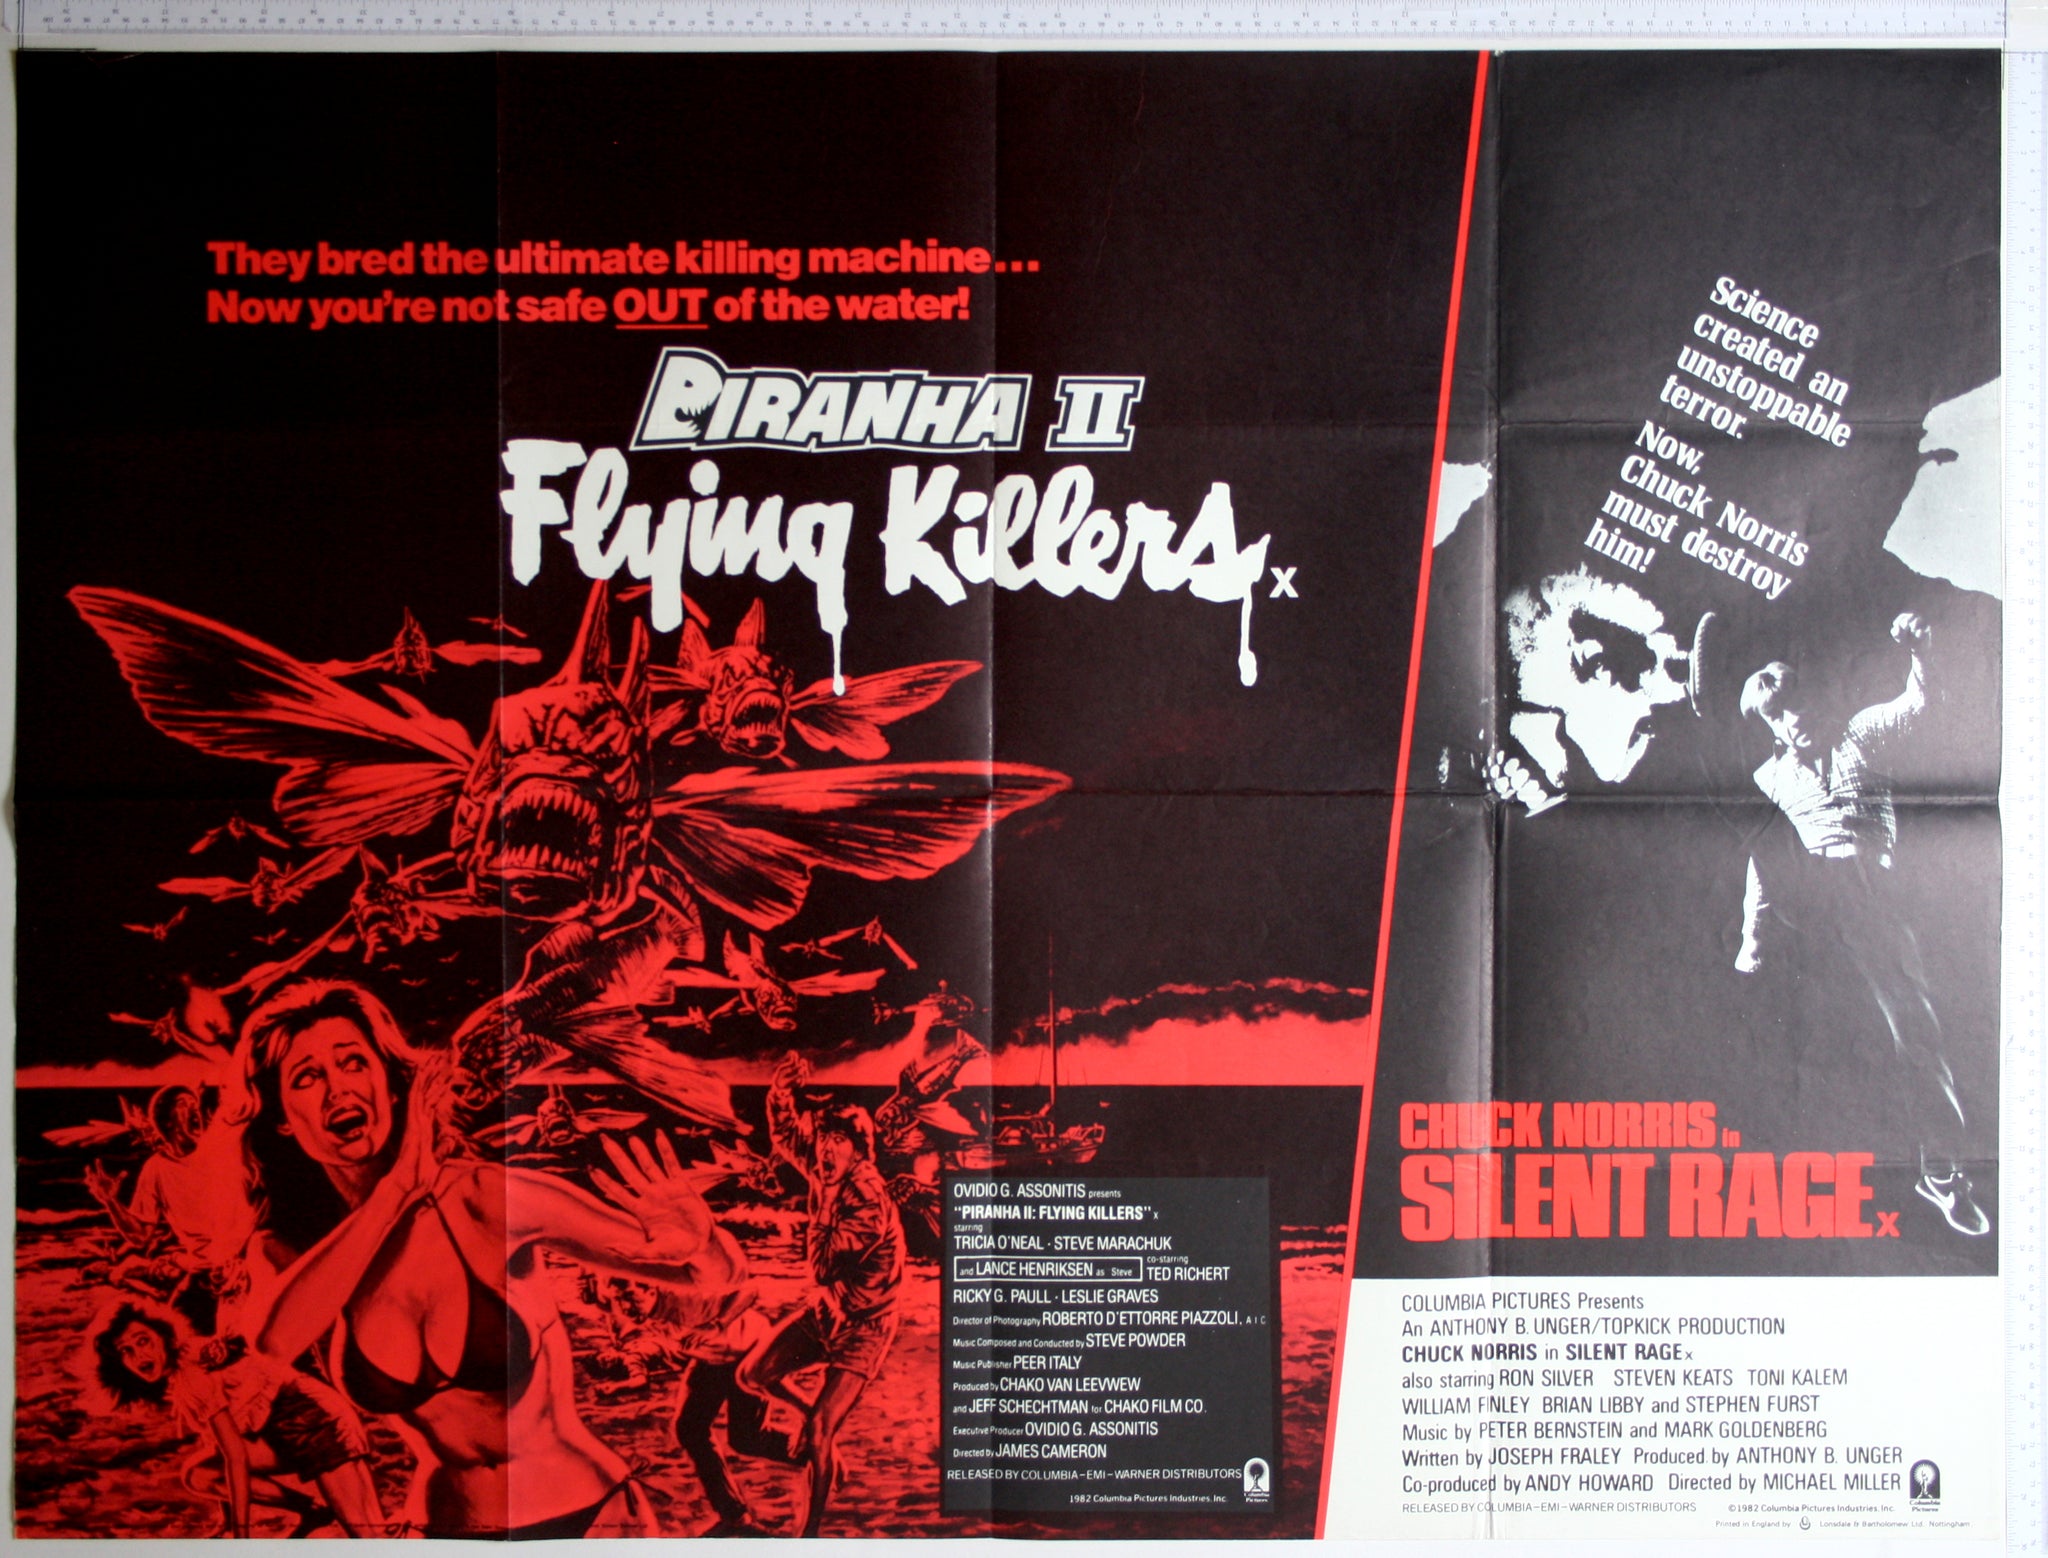 Red on black artwork of flying killer fish attacking scared people. On right, demon faces looms over kicking Norris.